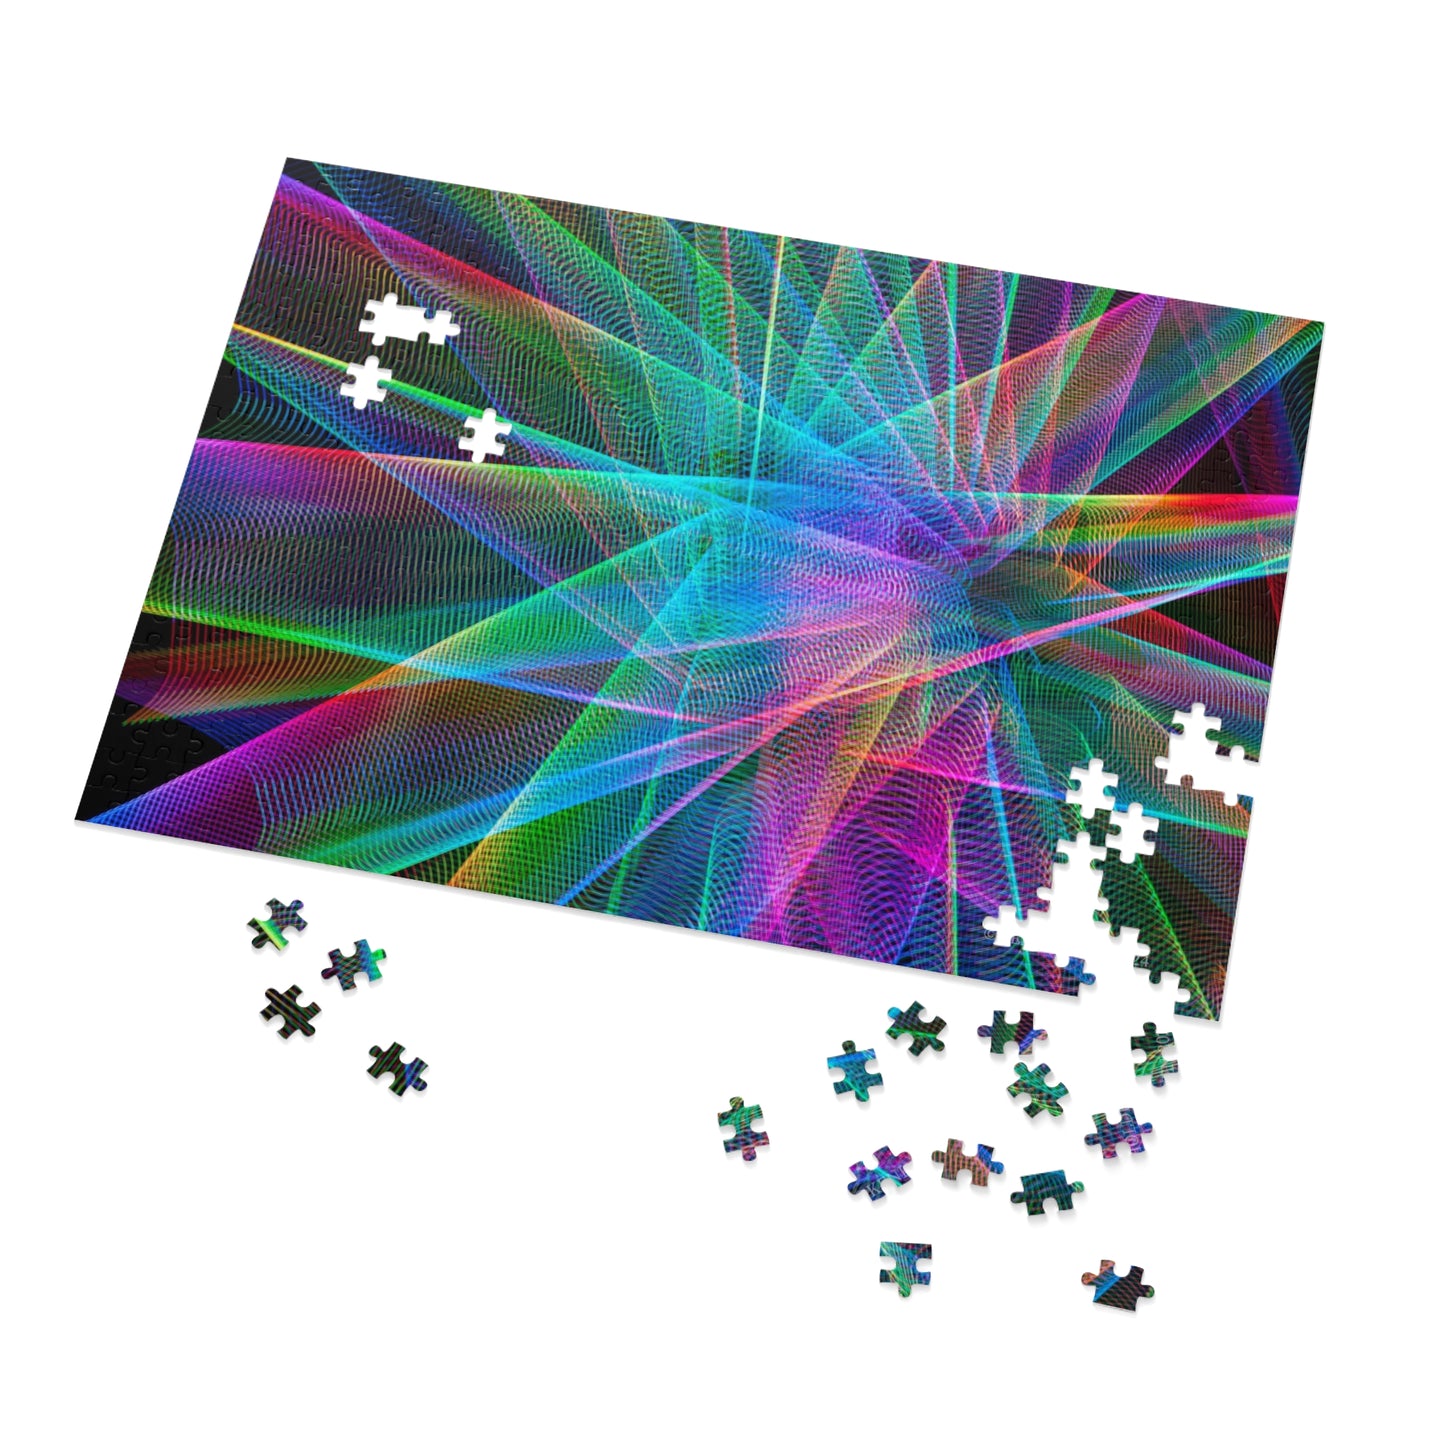 Abstract Light Jigsaw Puzzle, 500 Piece